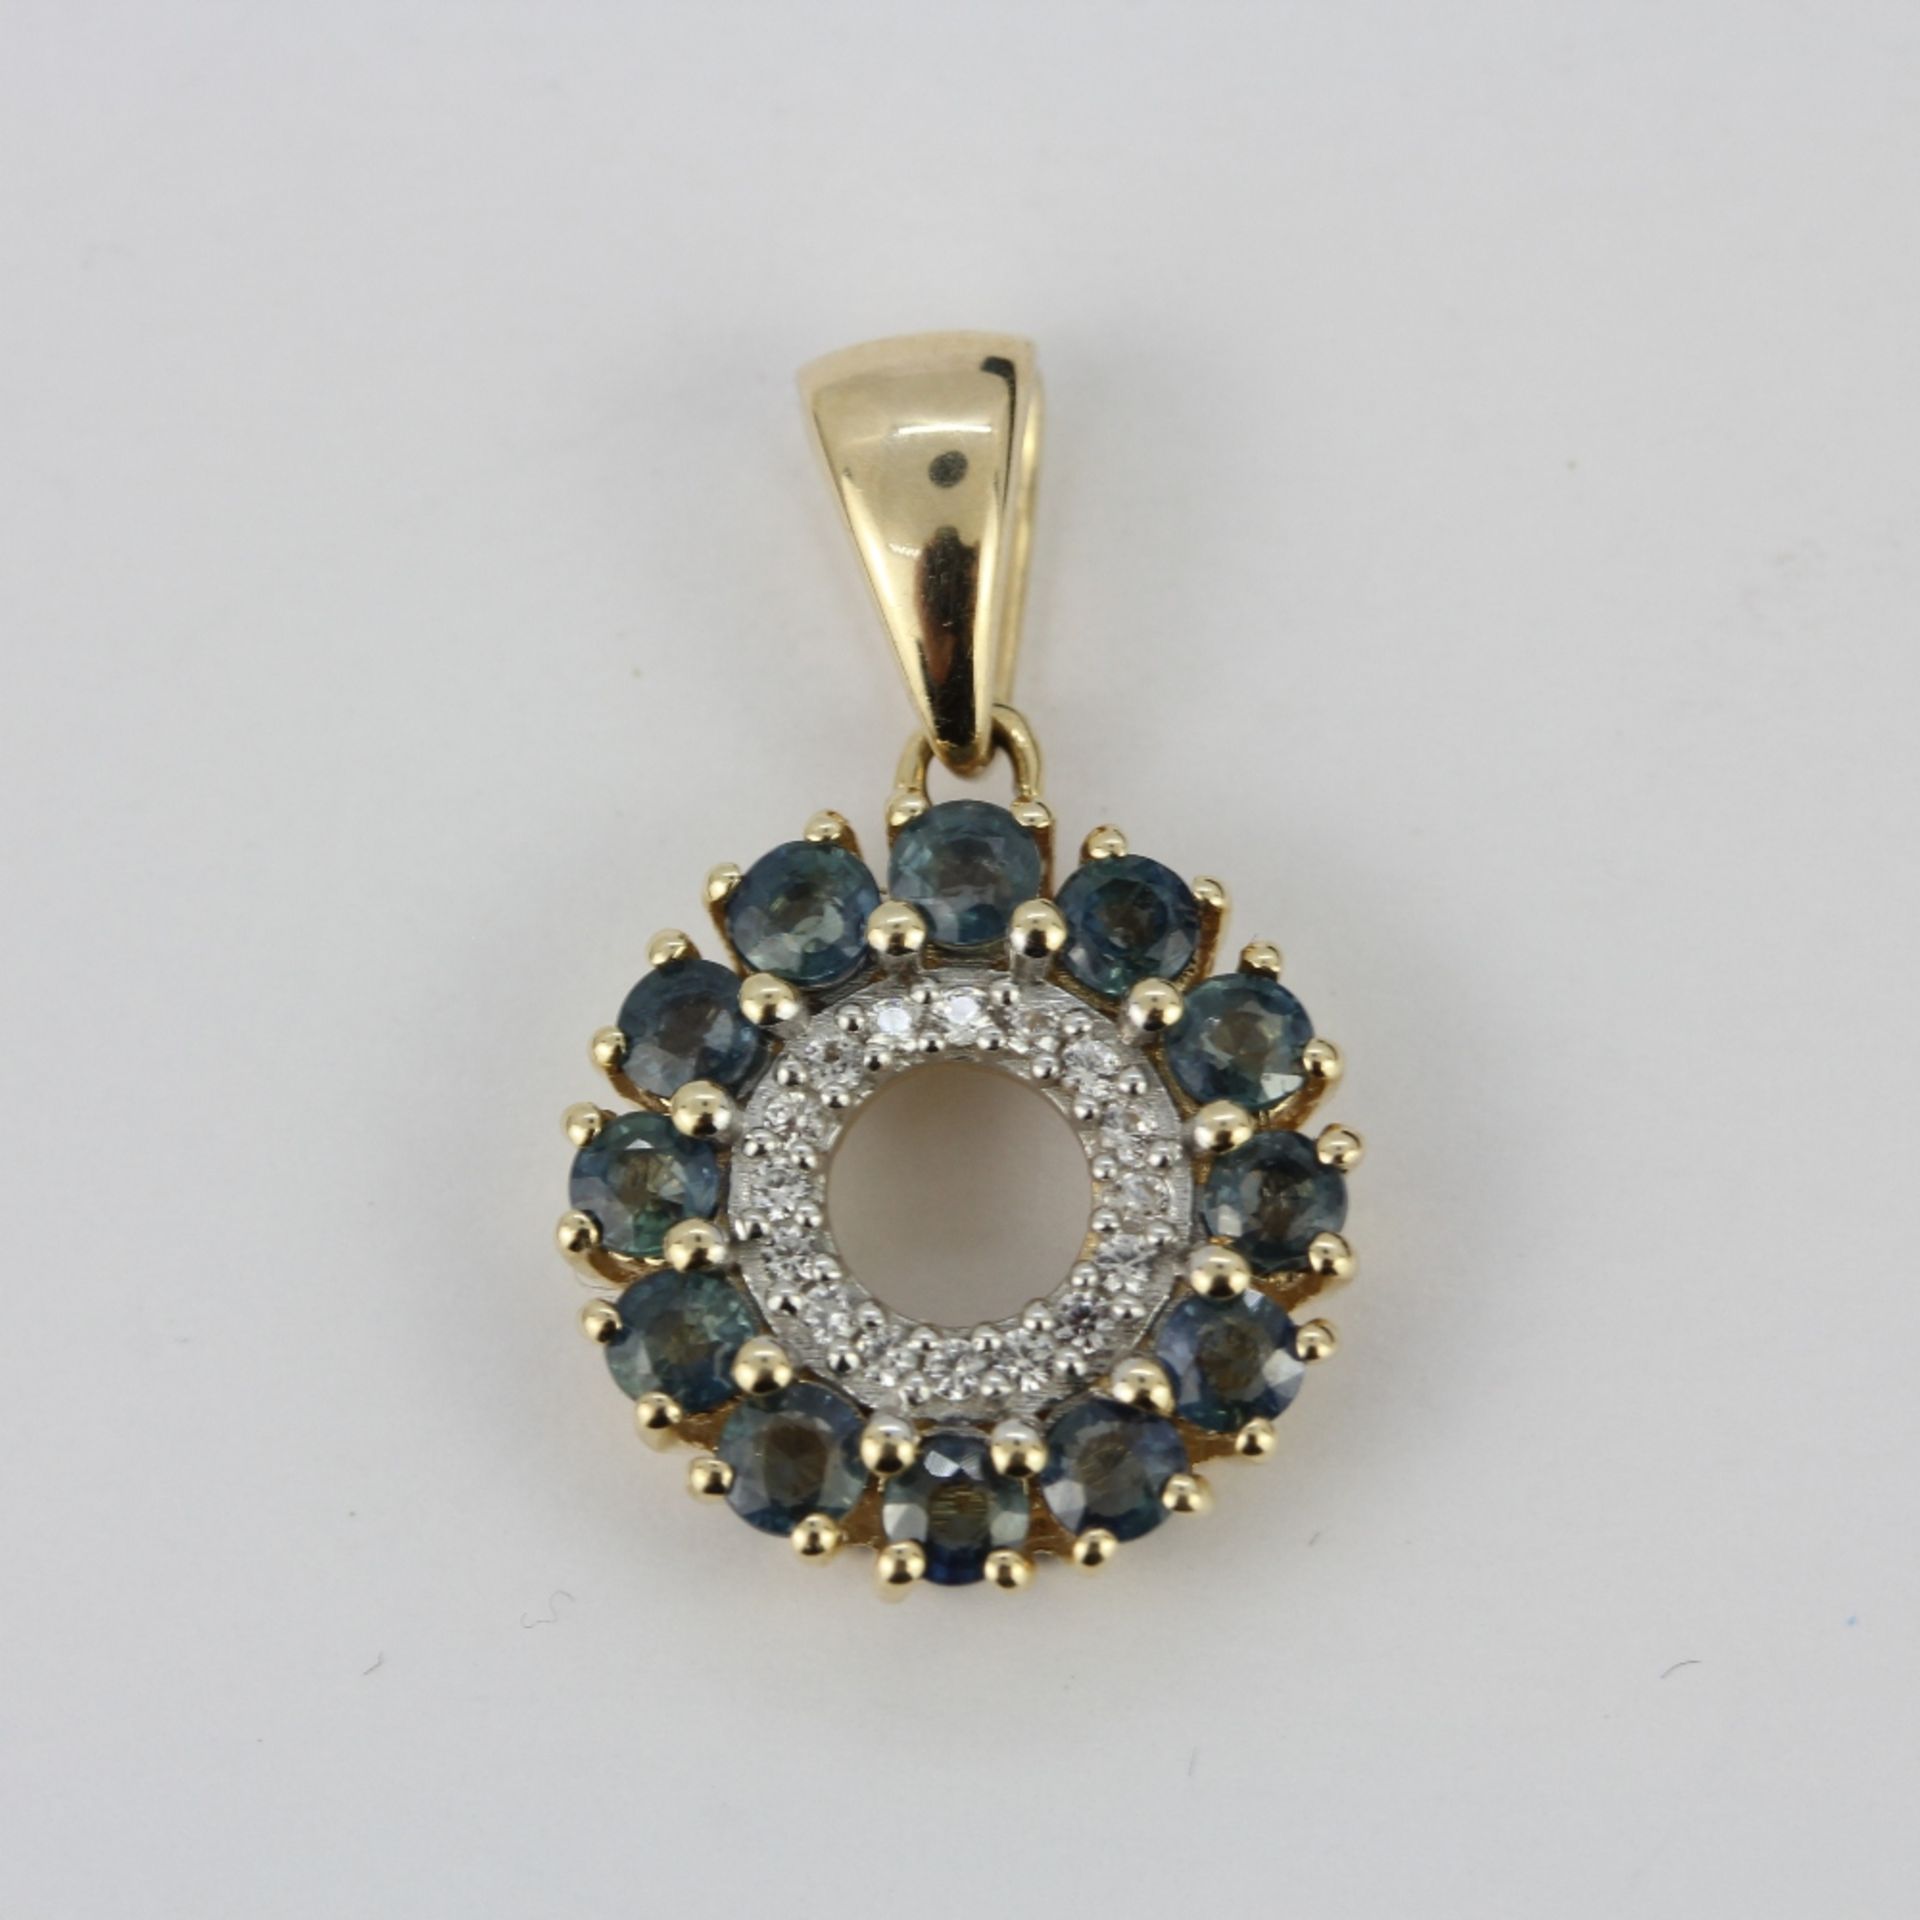 A 10ct yellow gold (stamped 10K) pendant set with London blue topaz and diamonds, L. 2cm. - Image 2 of 3